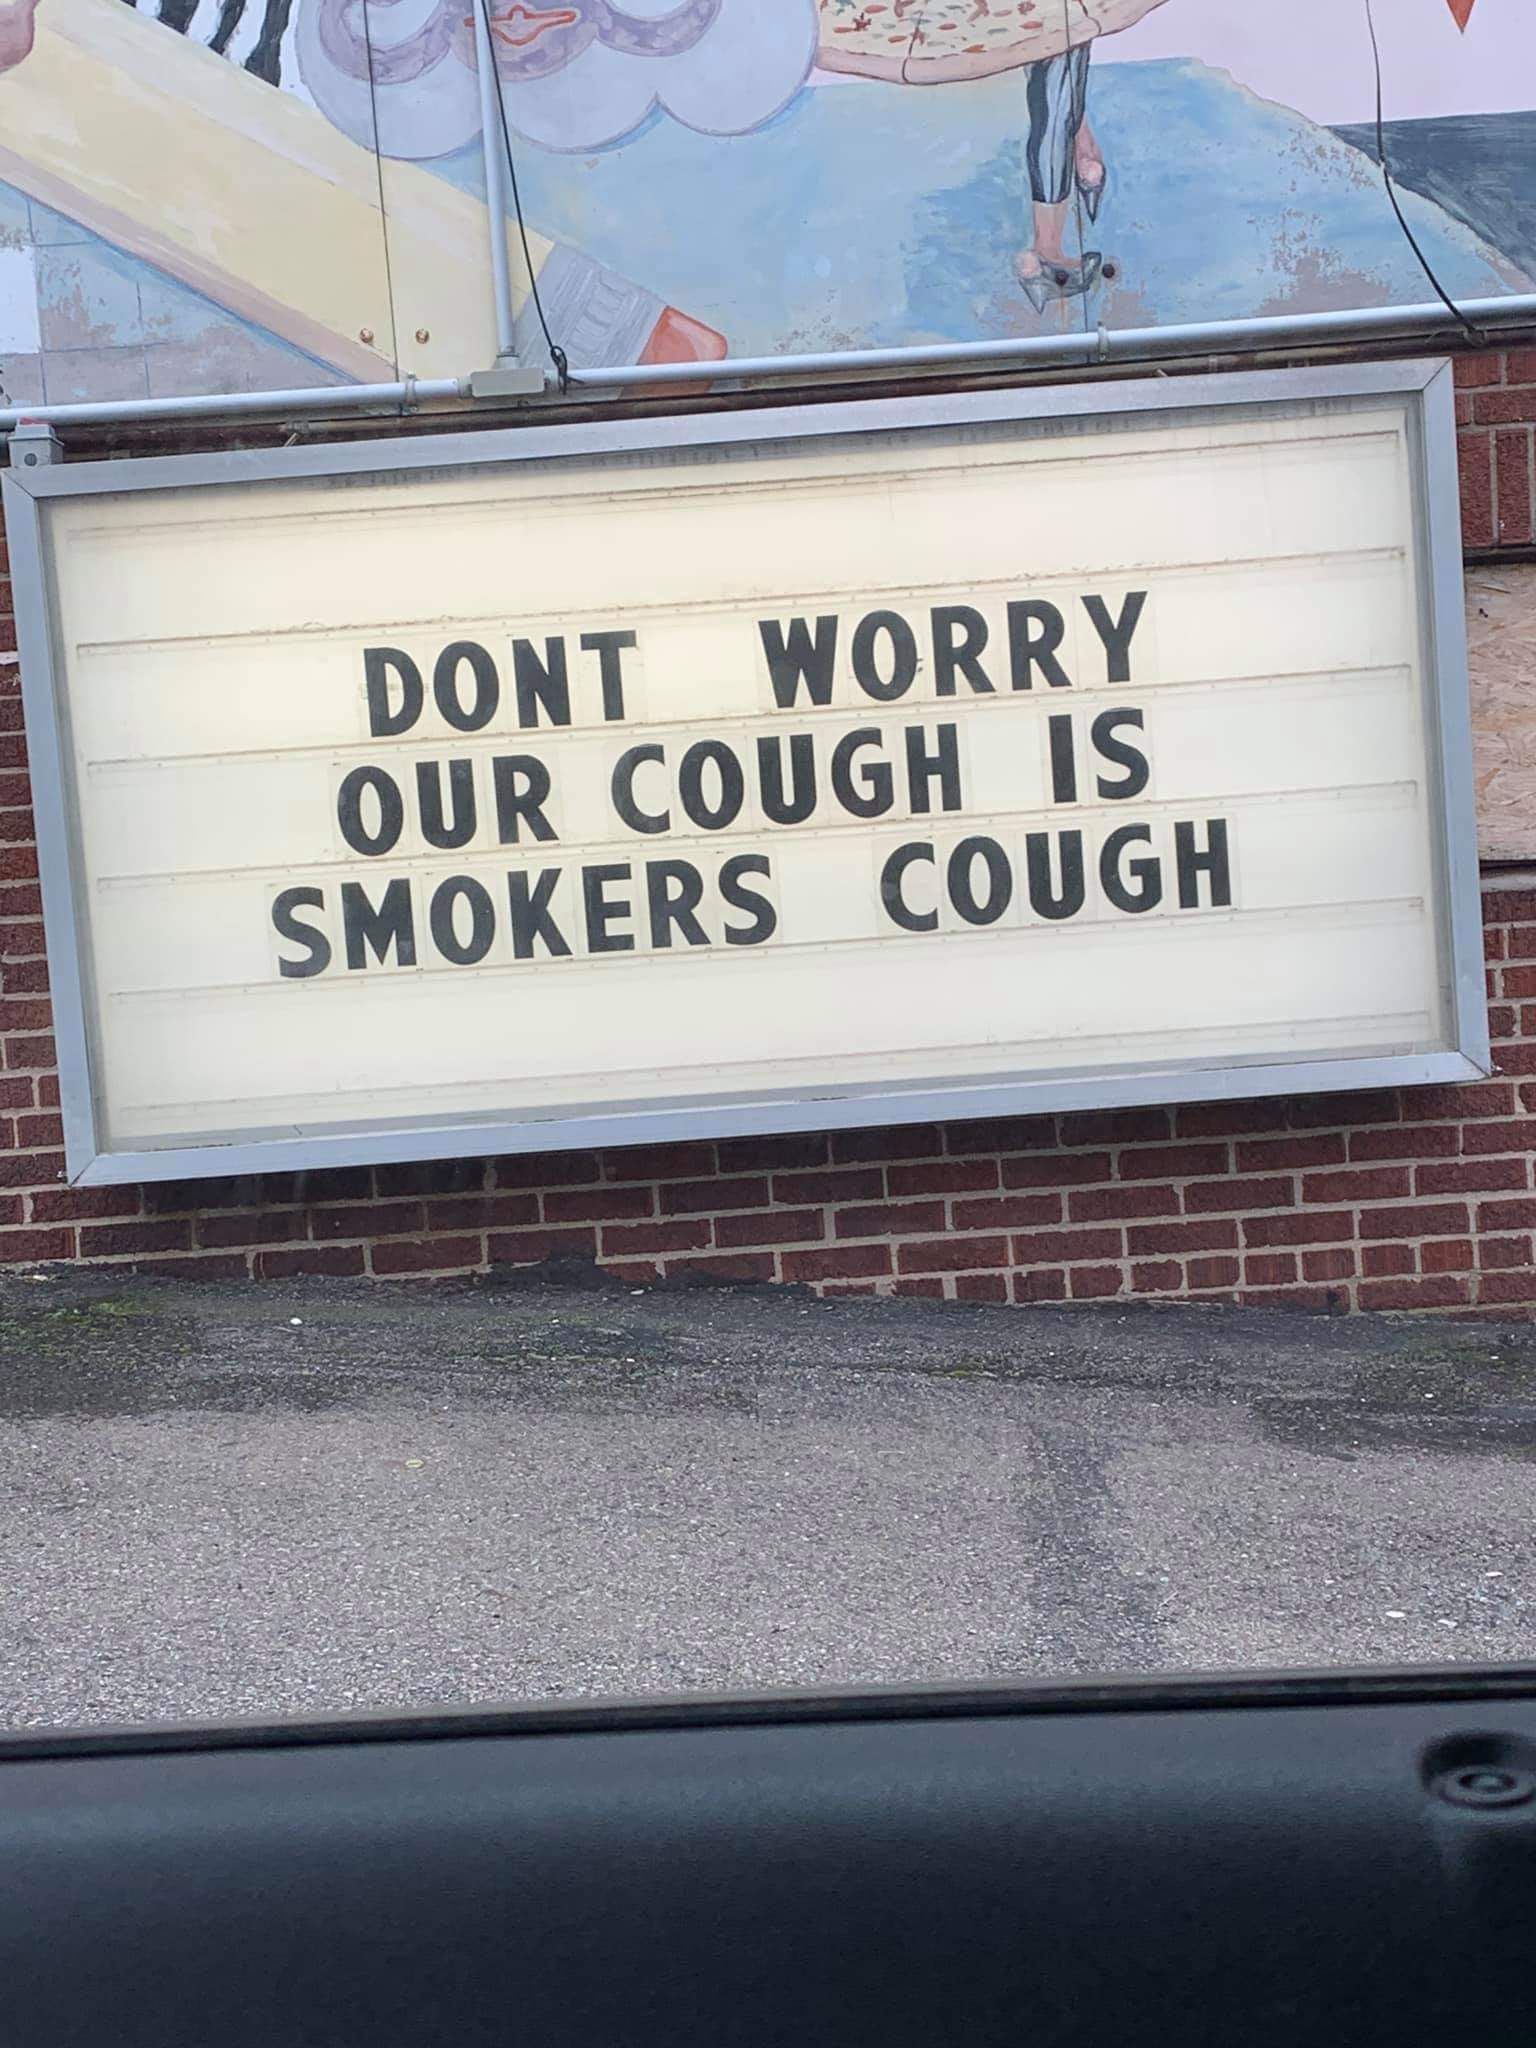 Pizza place in my town is known for being stoners, this was their sign today.